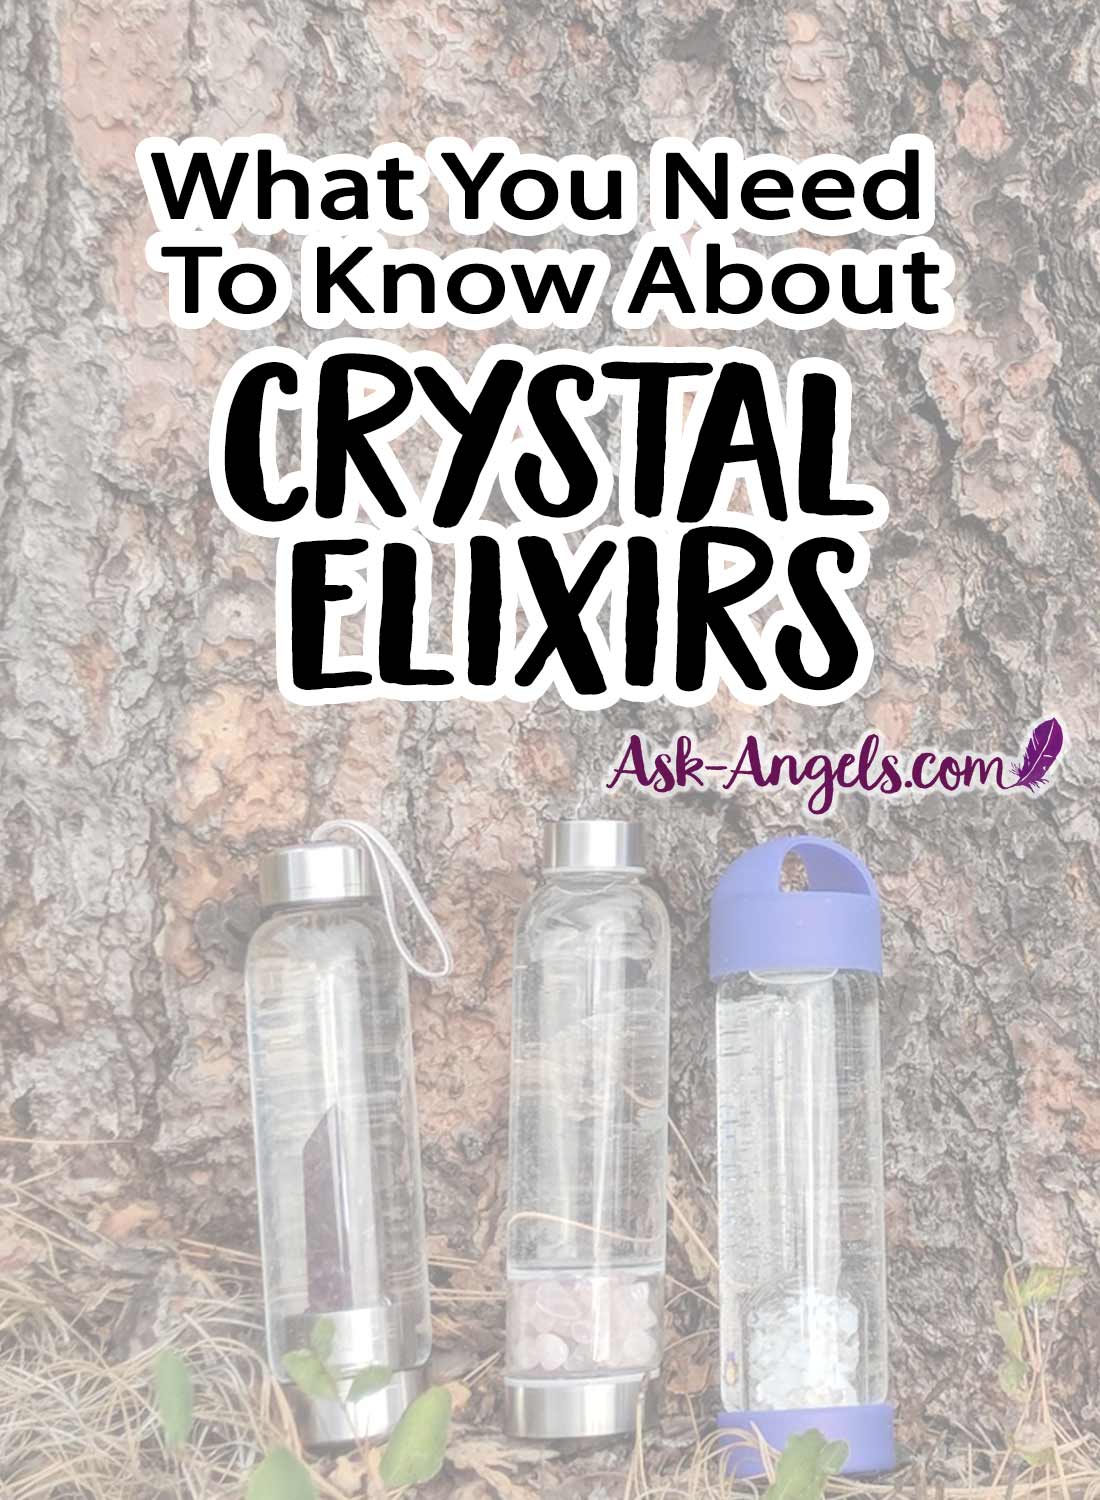 What You Need to Know About Crystal Elixirs